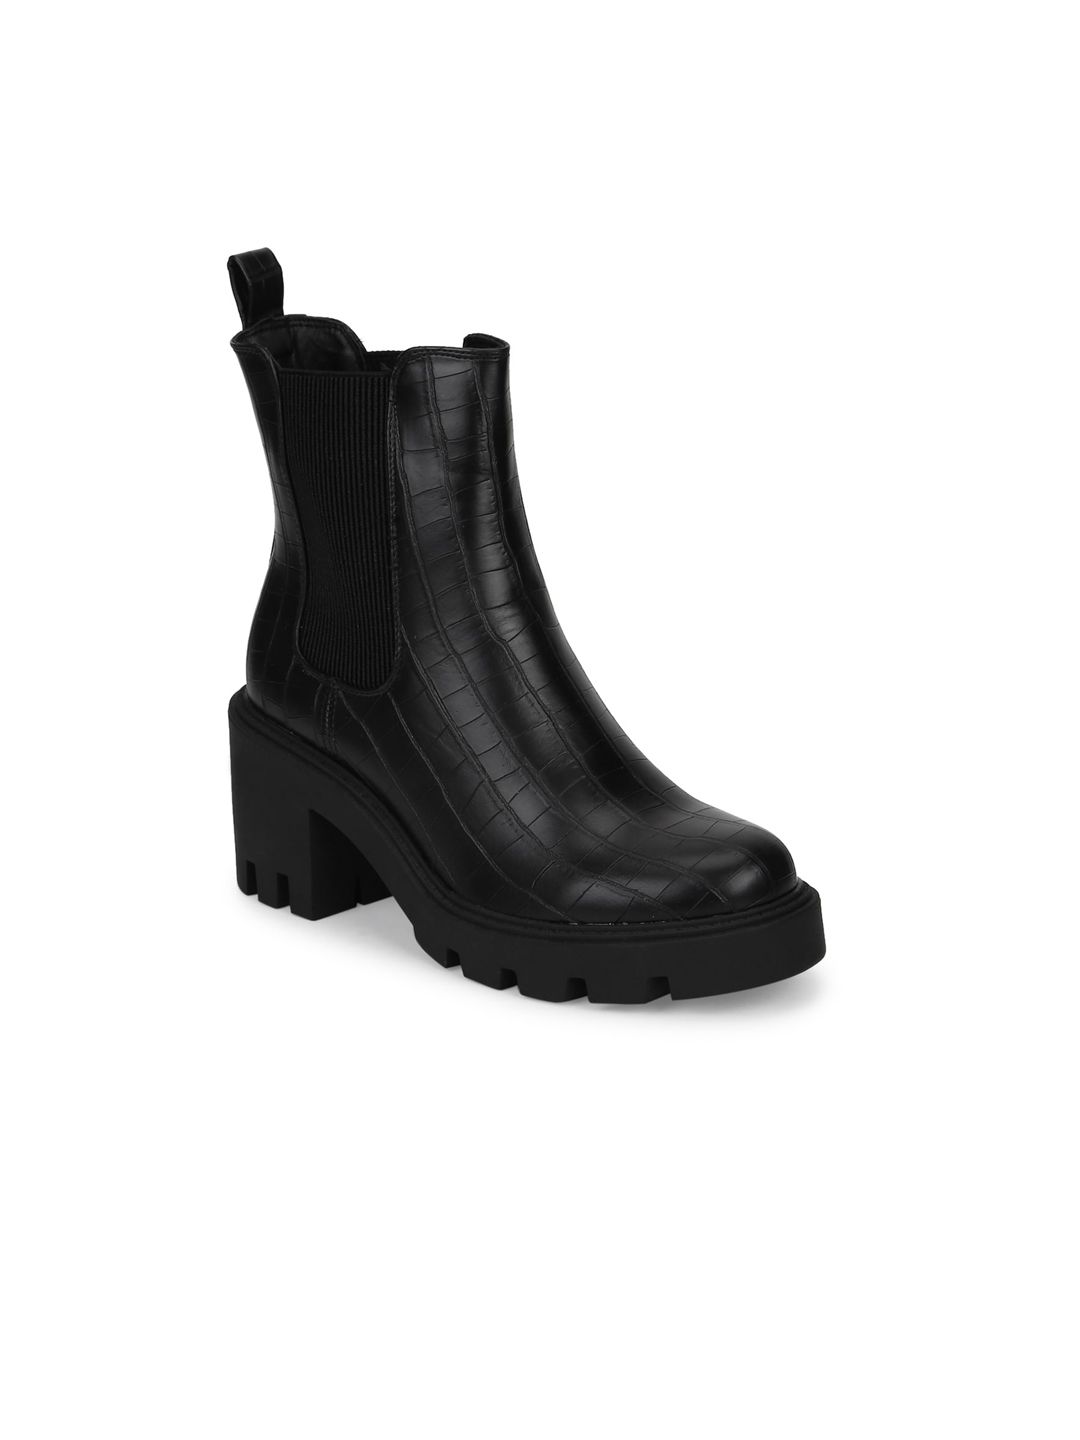 Truffle Collection Black Textured PU Block Heeled Boots Price in India